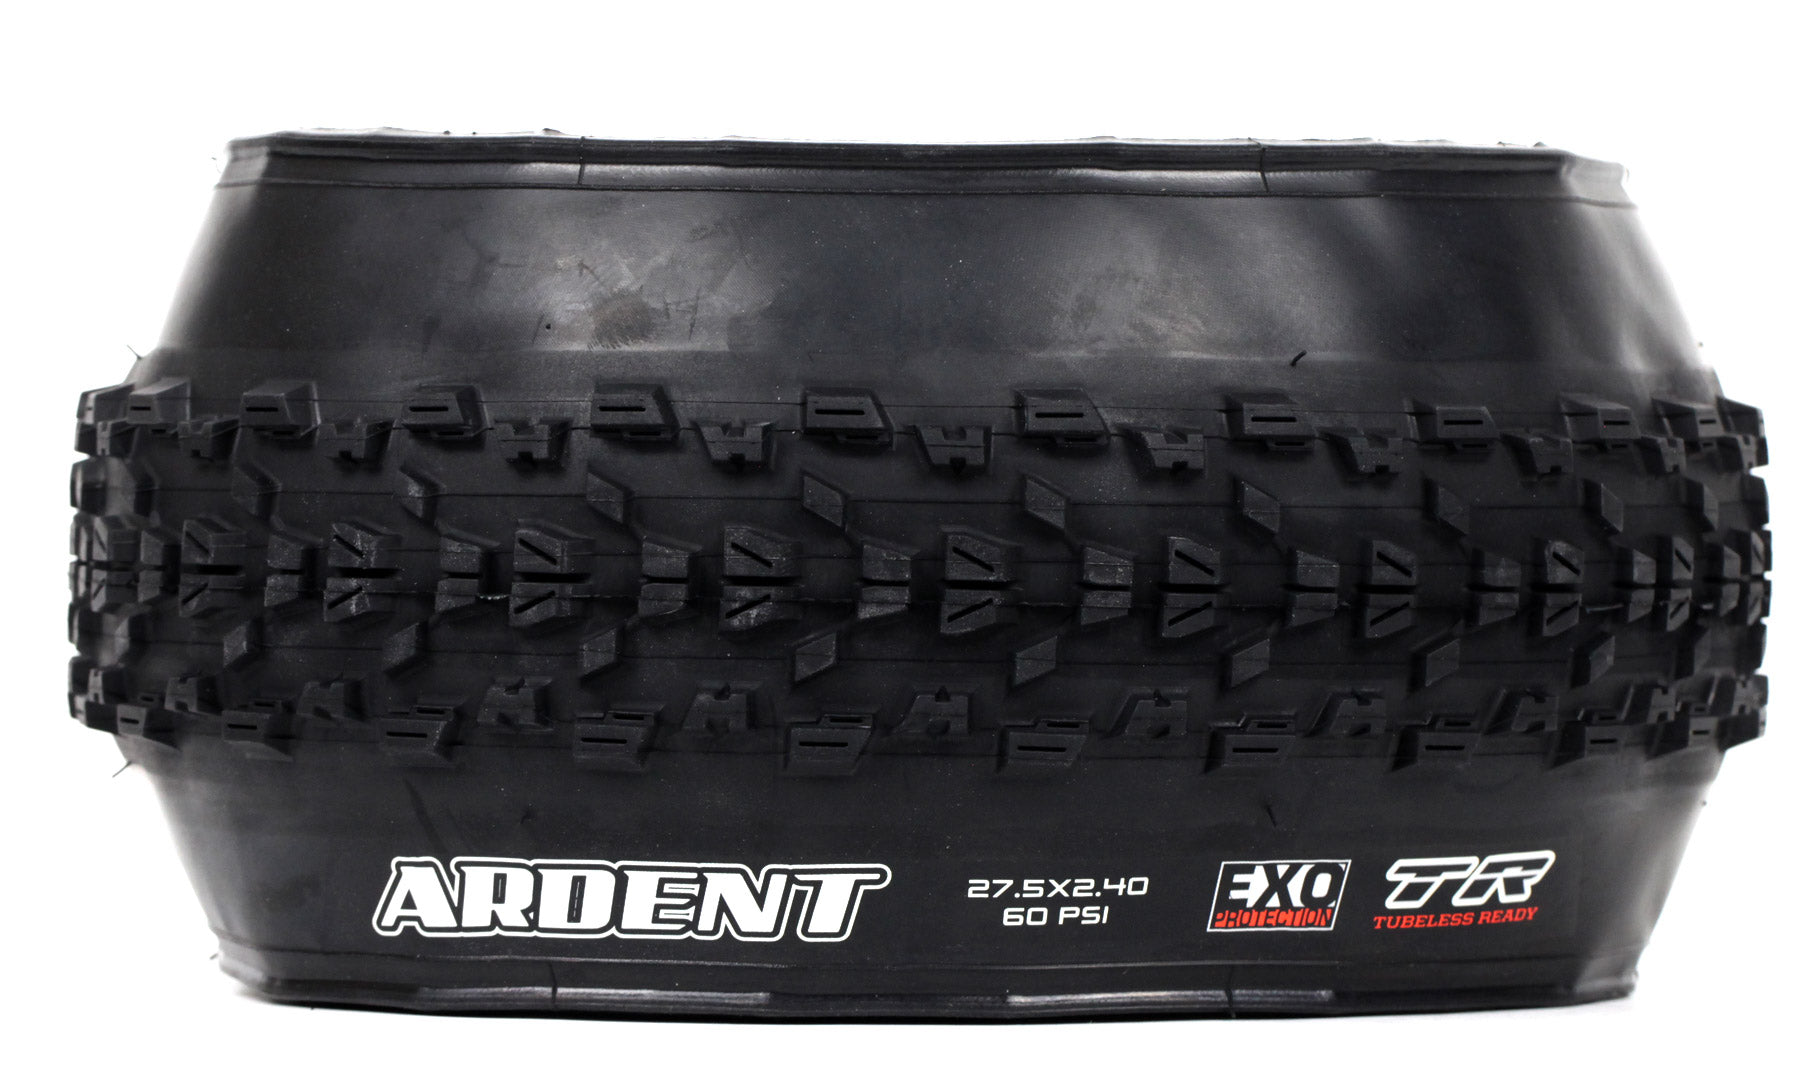 Pneu Maxxis Ardent - EXO Protection - Dual 62a/60a - Tubeless Ready - TB96734100